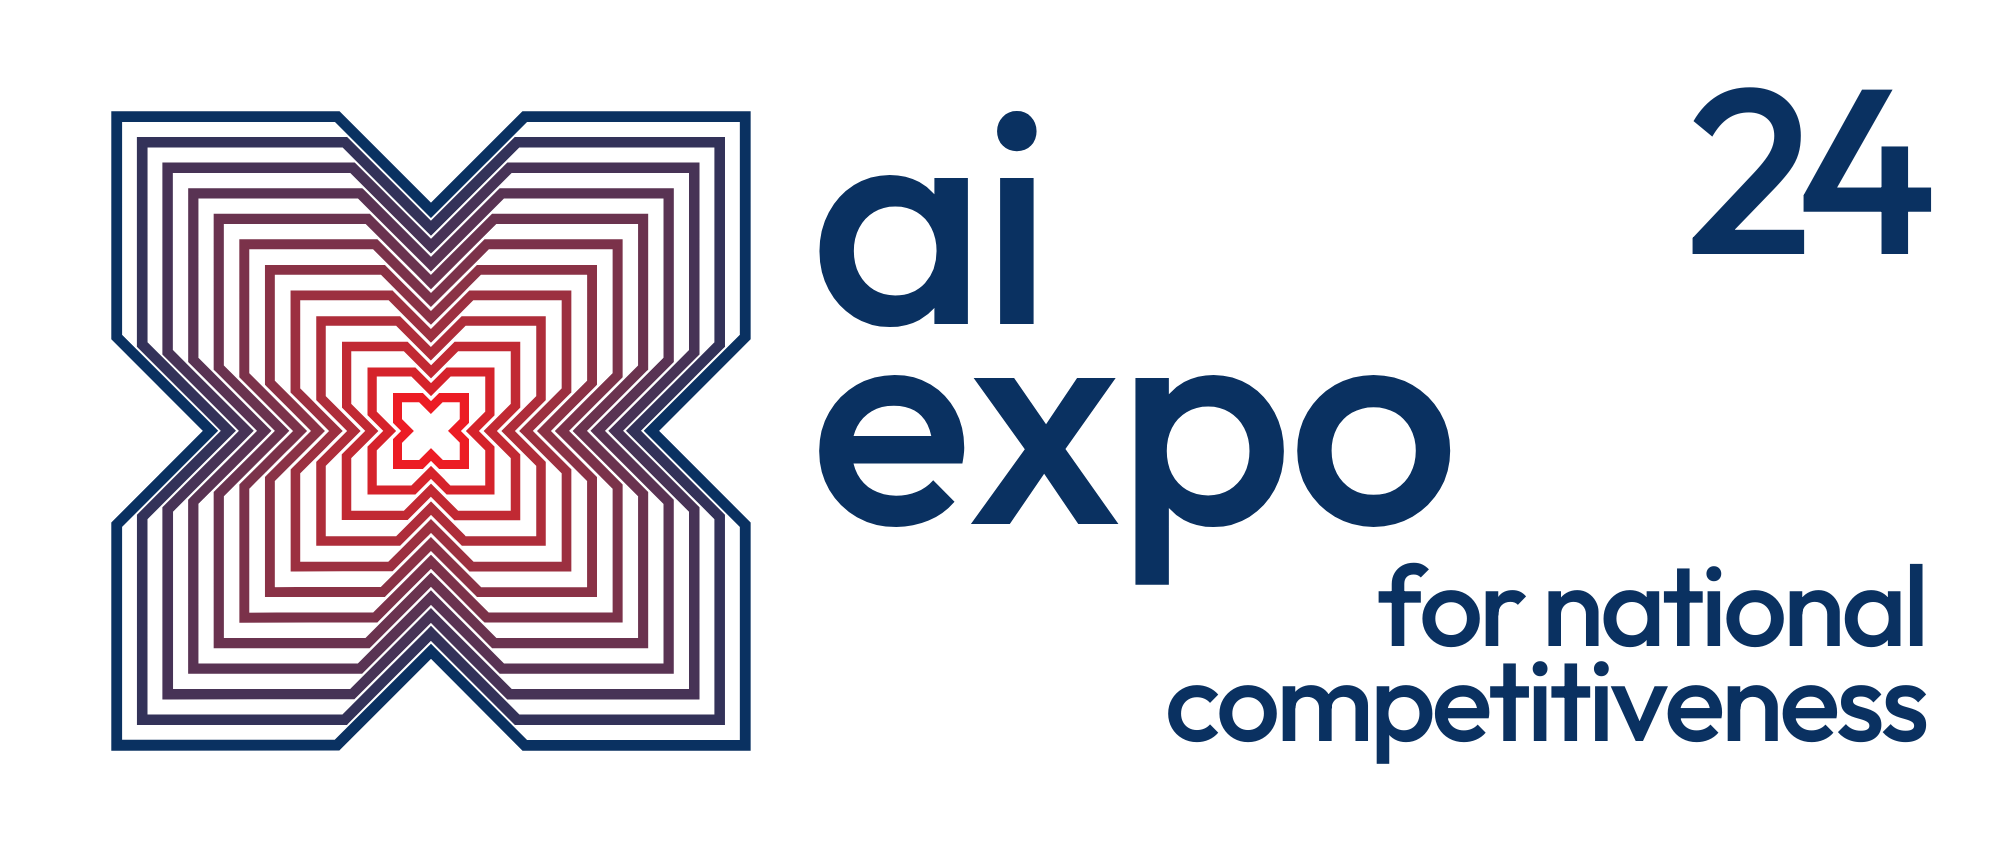 XRA’S SENIOR VP OF PUBLIC POLICY PARTICIPATED IN THE SPECIAL COMPETITIVE STUDIES PROJECT AI EXPO FOR NATIONAL COMPETITIVENESS